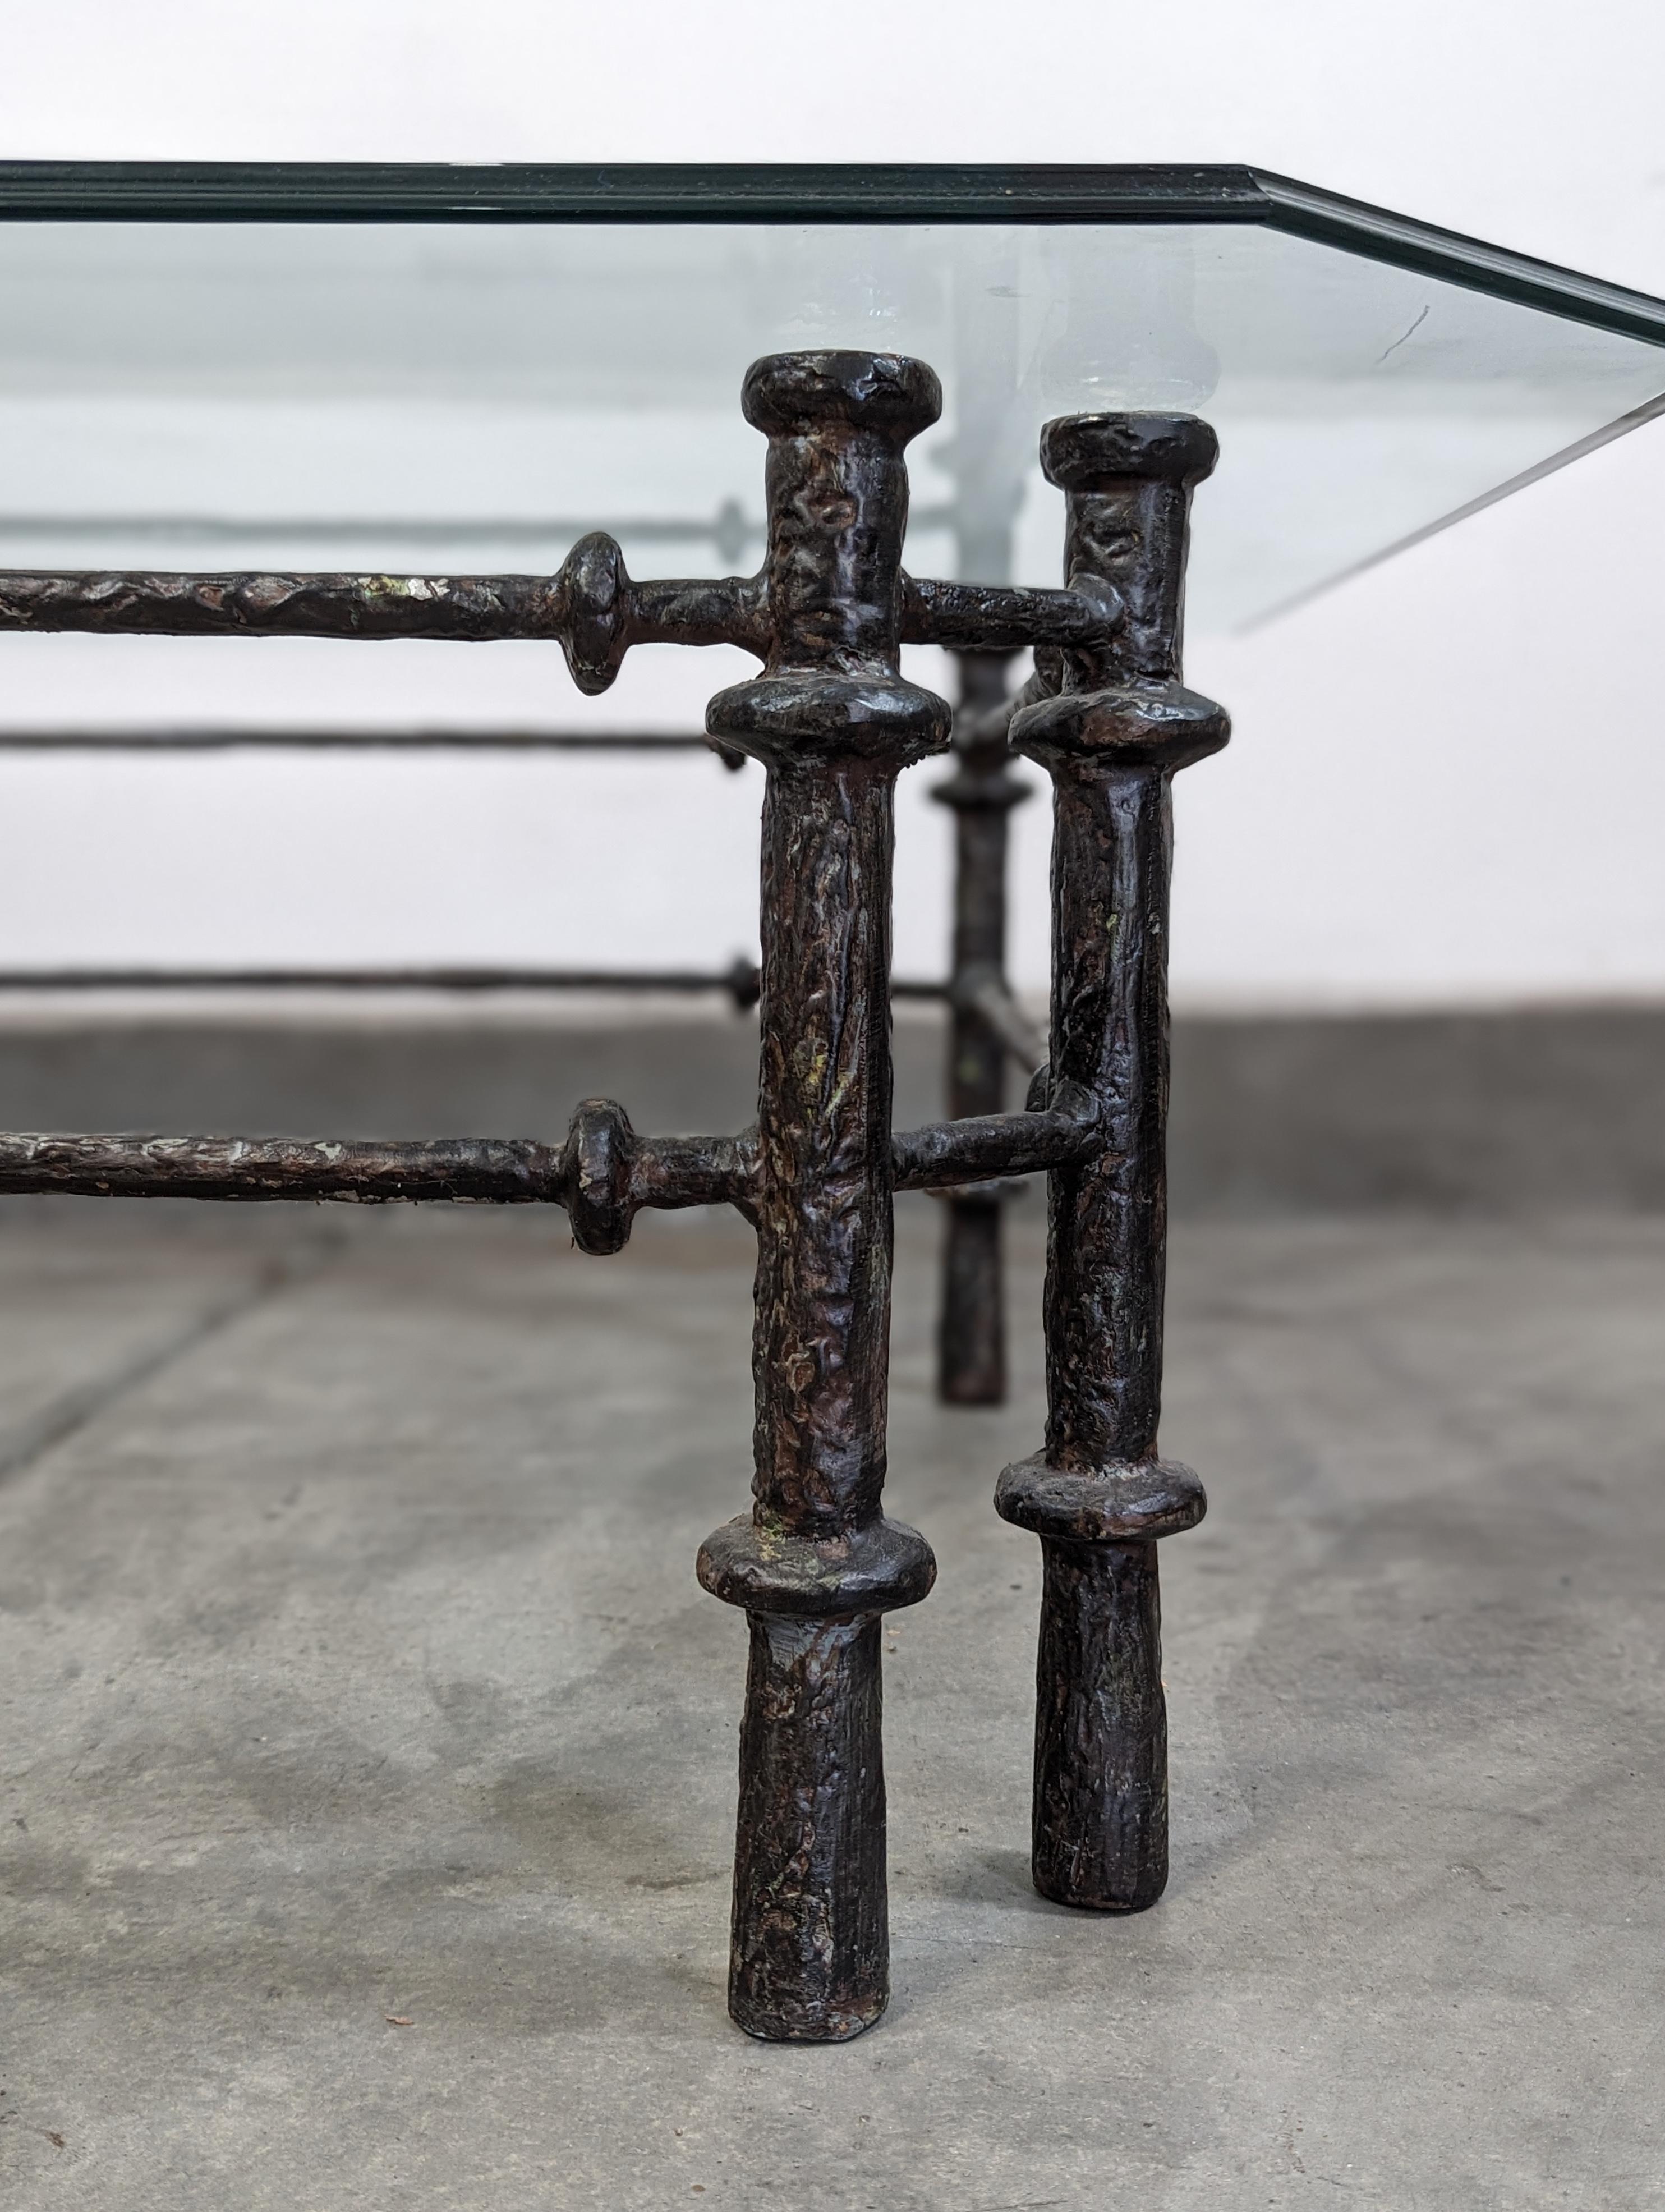 Metal Sculptural Coffee Table, Bronze Finish in the Manner of Diego Giacometti, c1970s For Sale